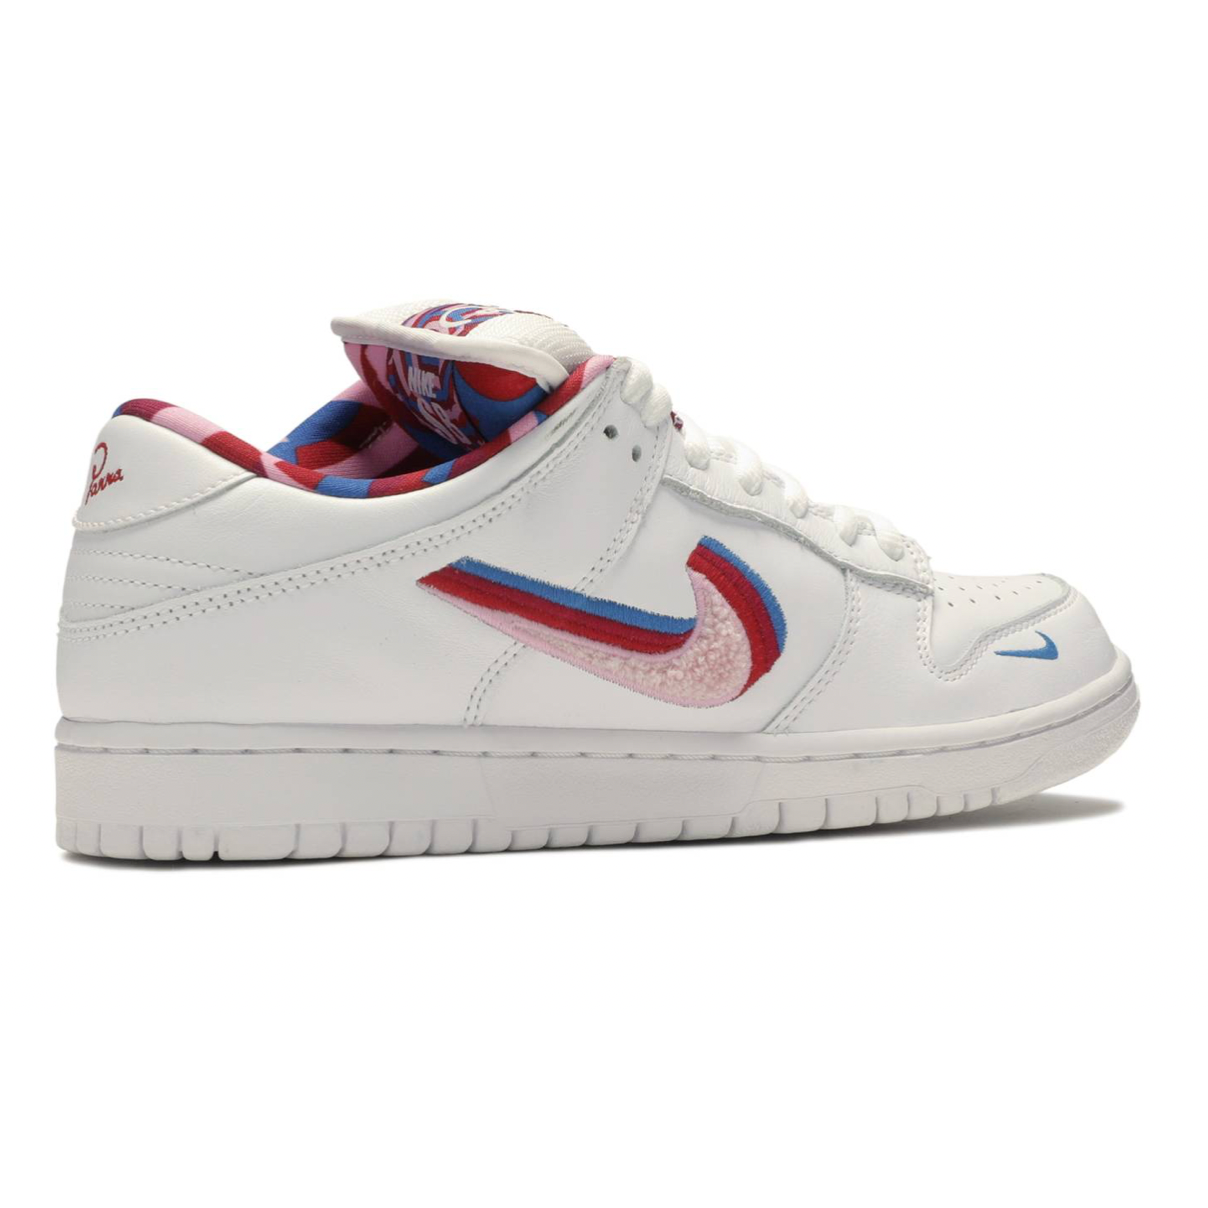 Nike SB Dunk Low Parra from Nike